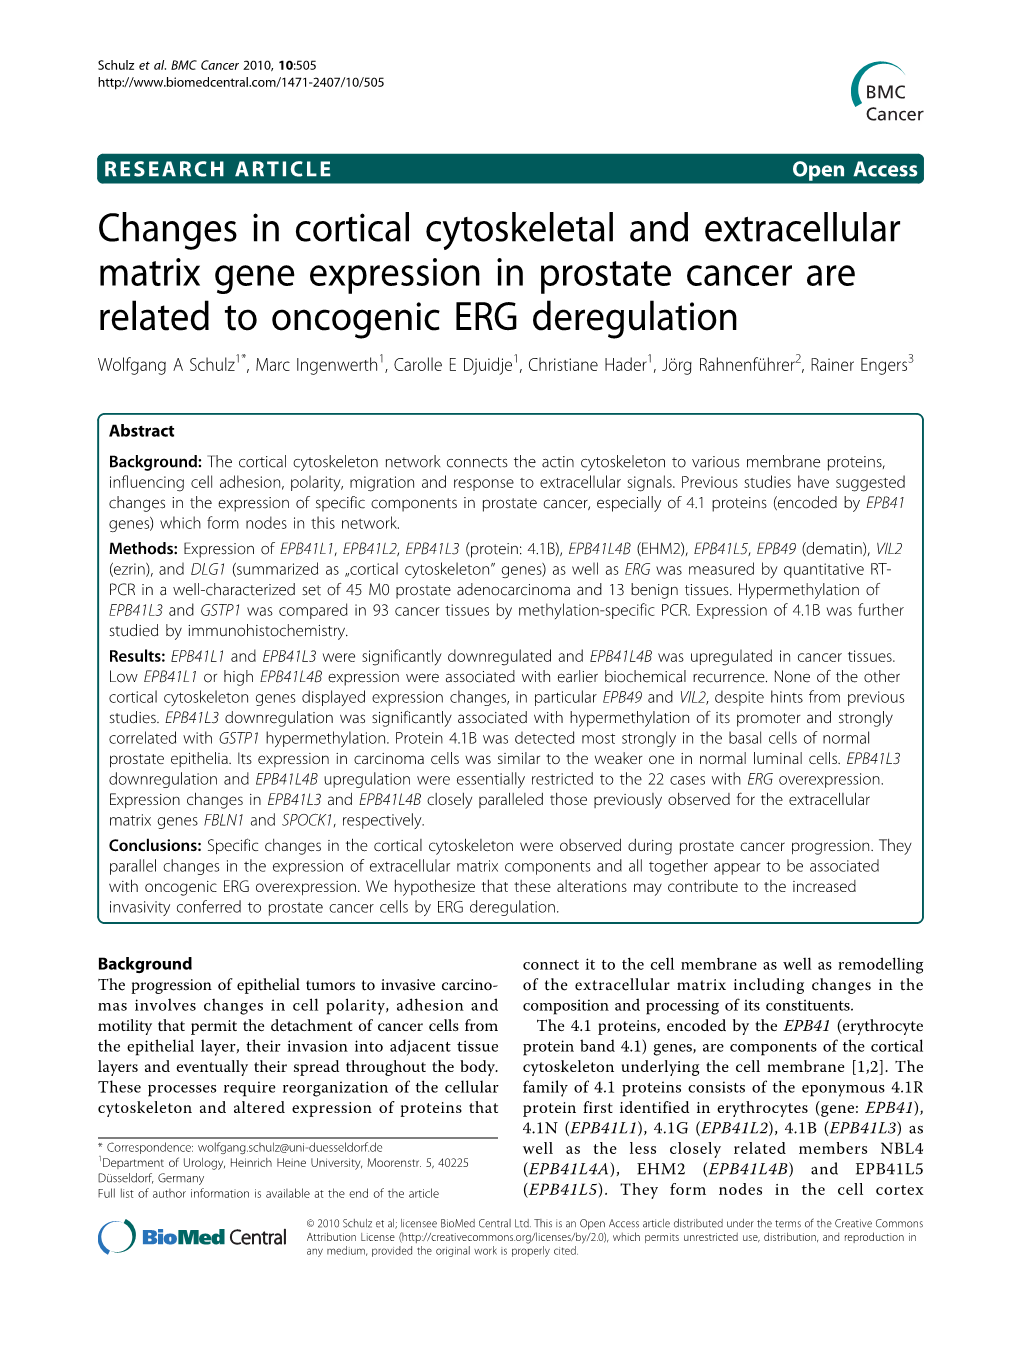 Changes in Cortical Cytoskeletal and Extracellular Matrix Gene